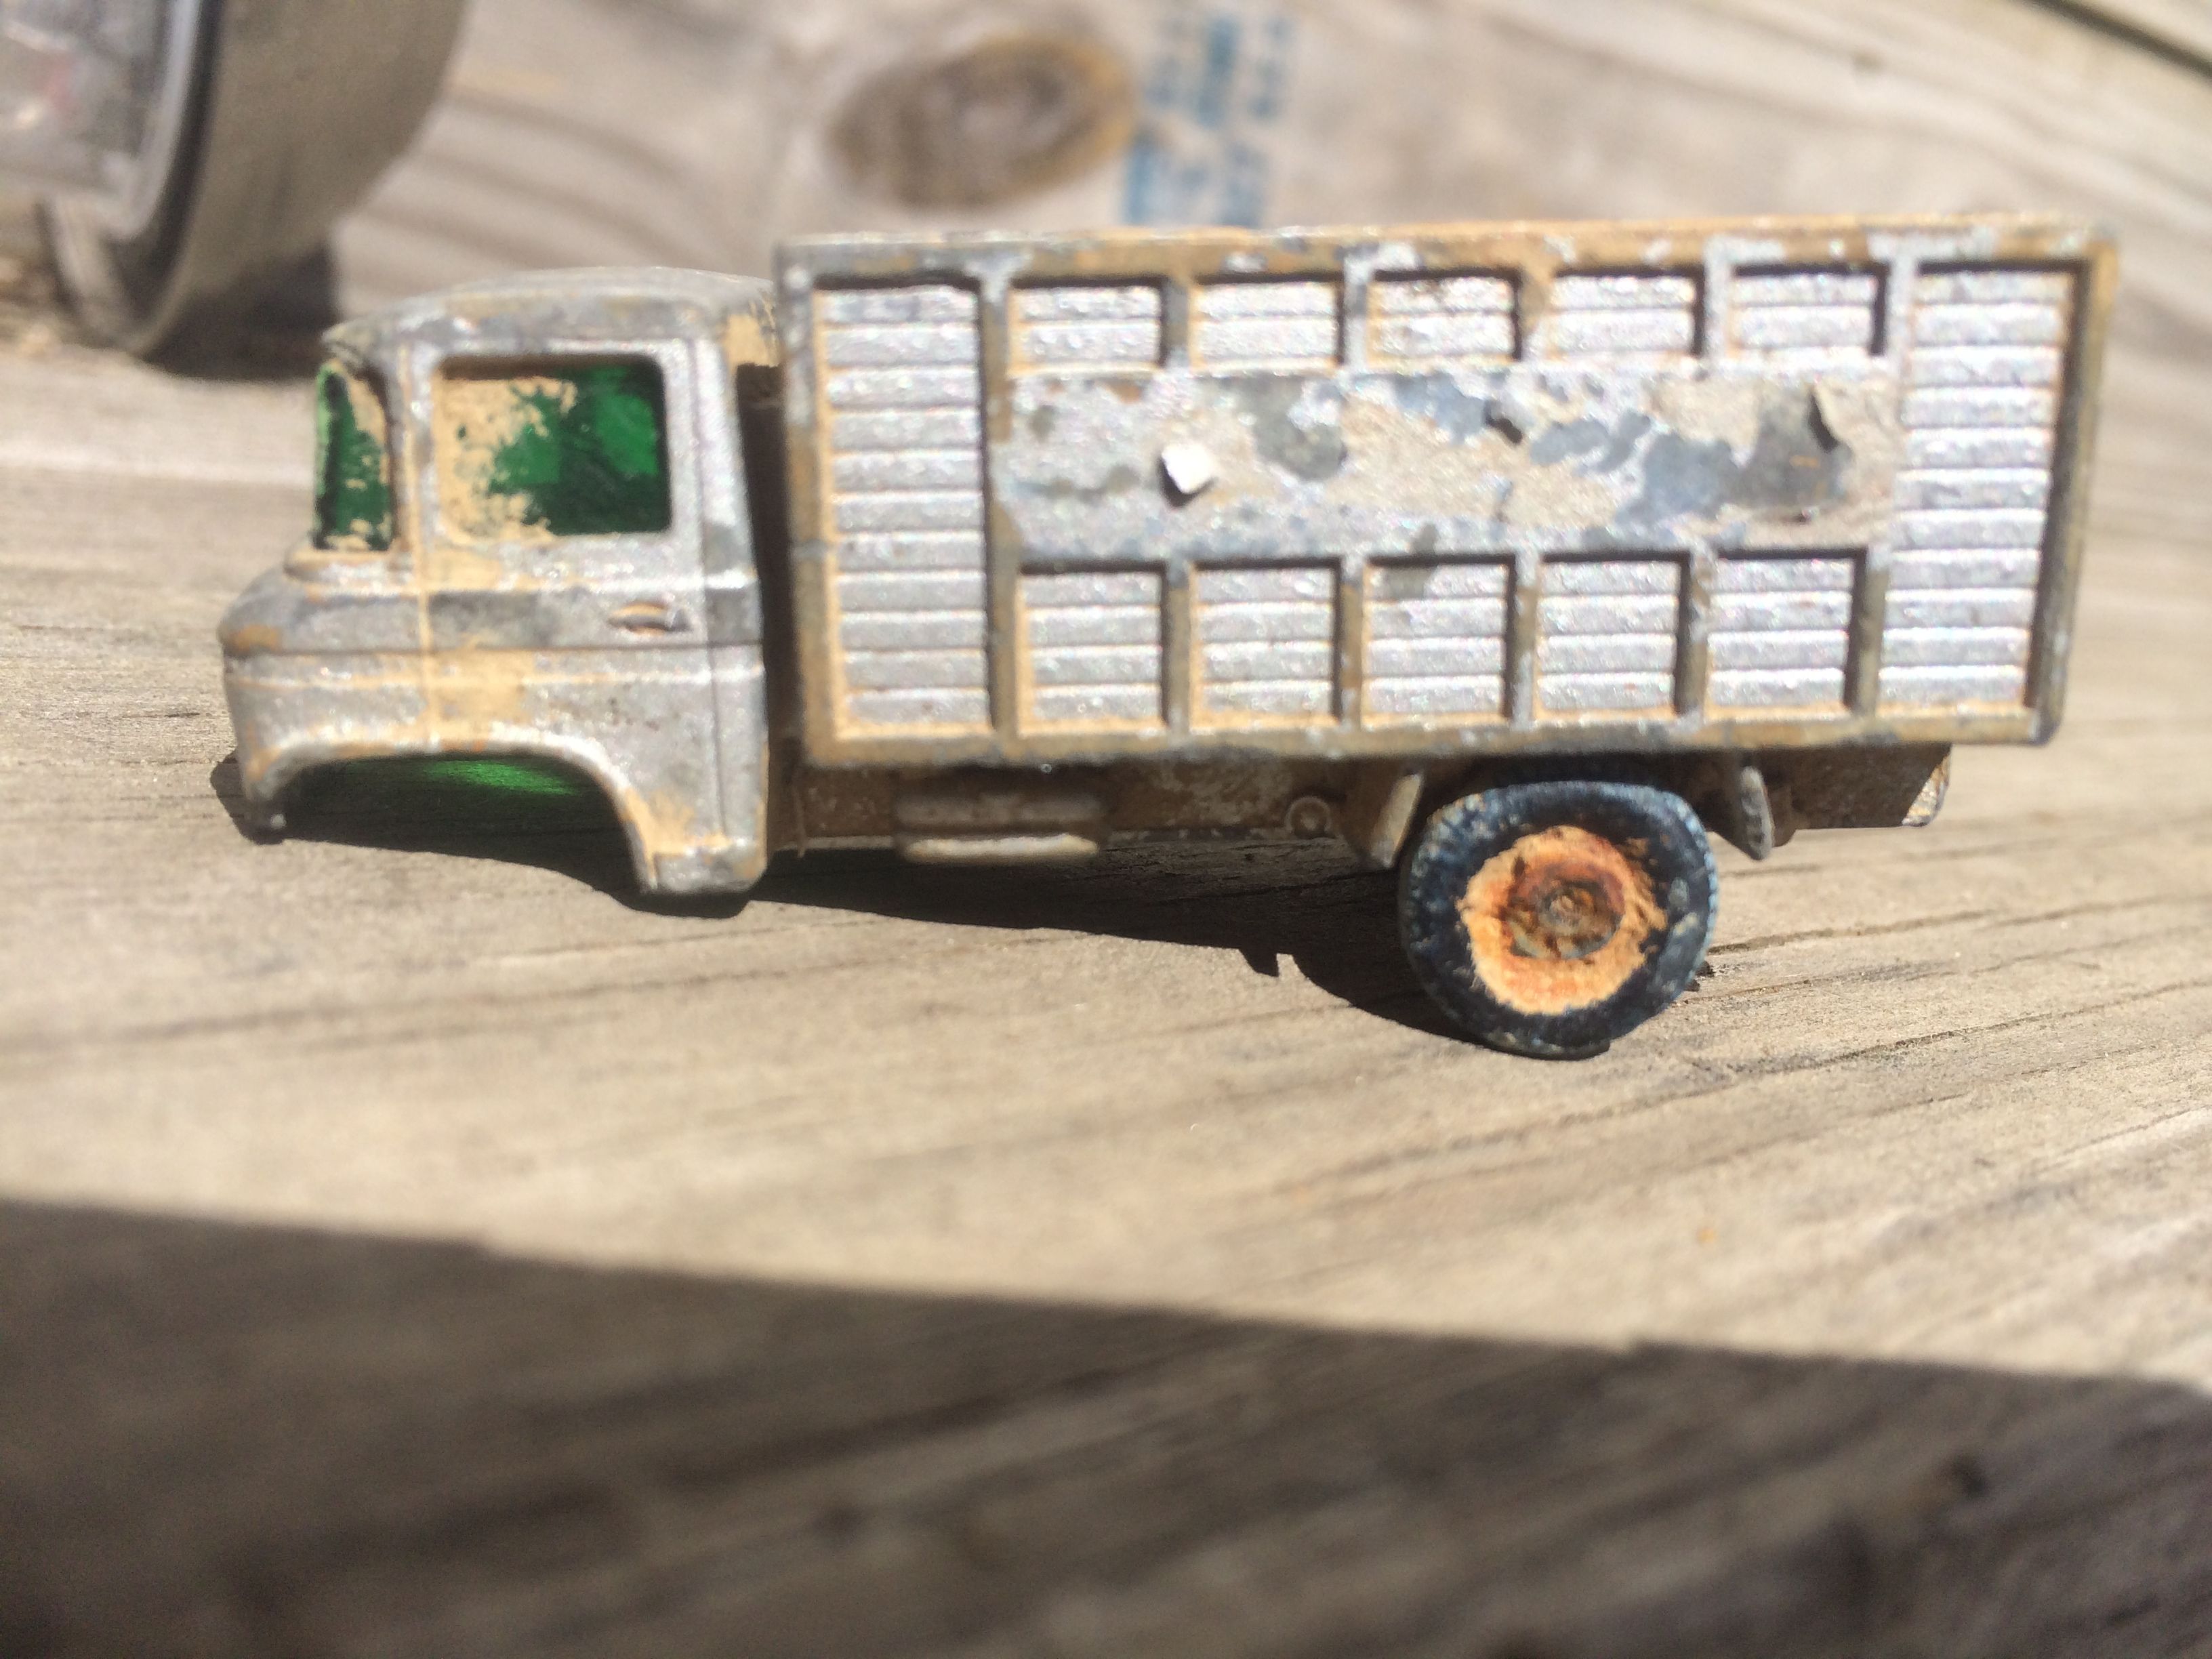 Matchbox Series No. 11 Lesney Production Co. 1969 
Scaffolding Truck - License #S-ZE41
Back Yard Find 14 Mar 14